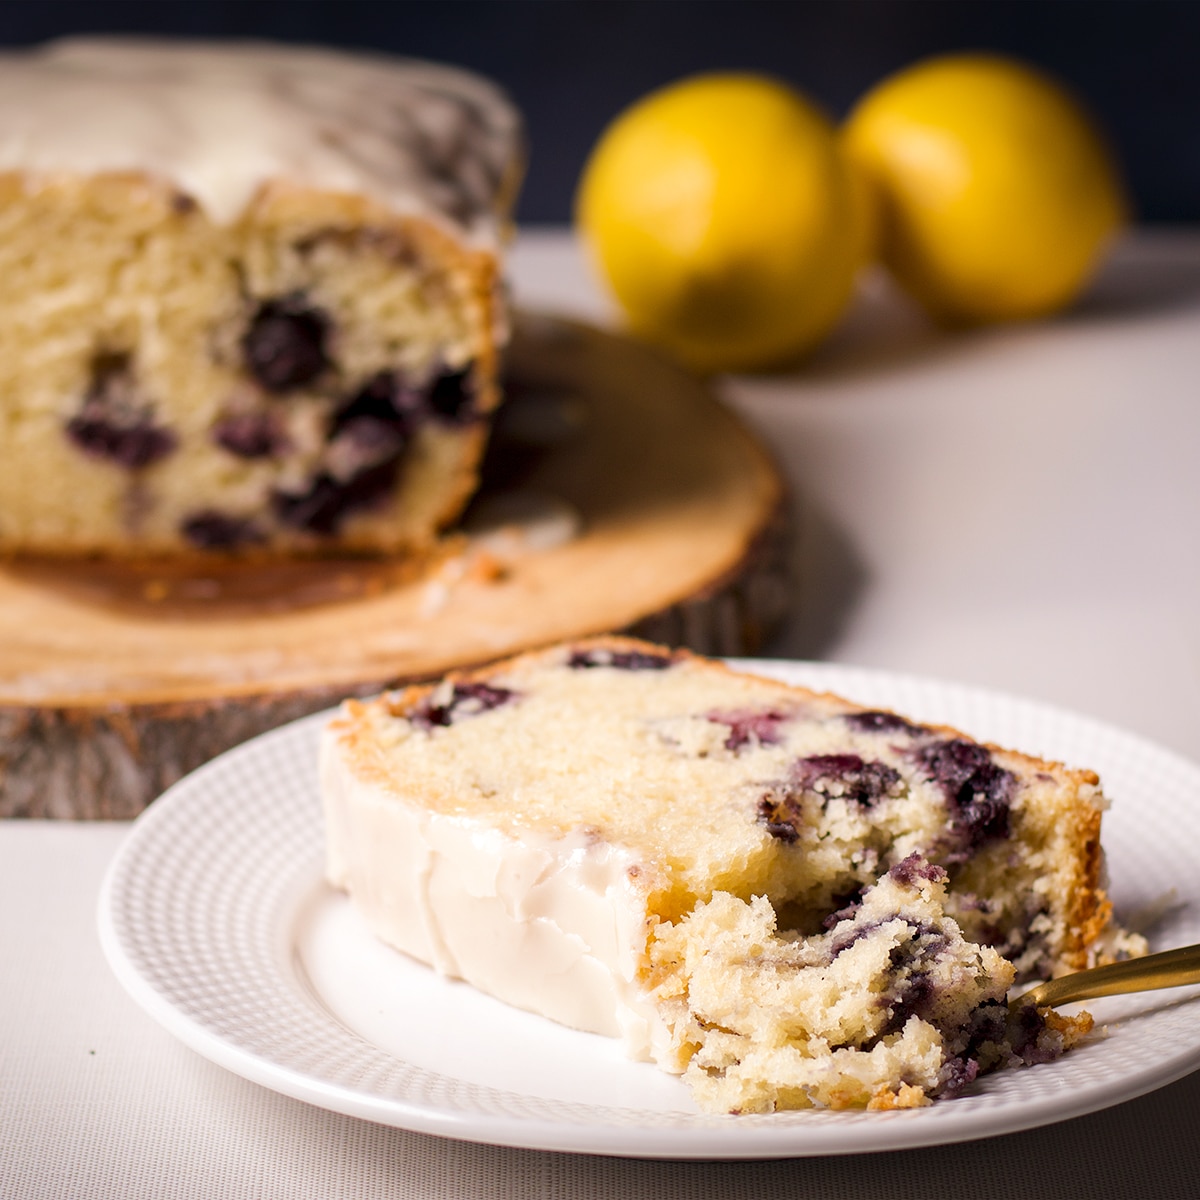 A slice of blueberry loaf cake with lemon icing on a white plate with a gold fork taking a bite of the cake.